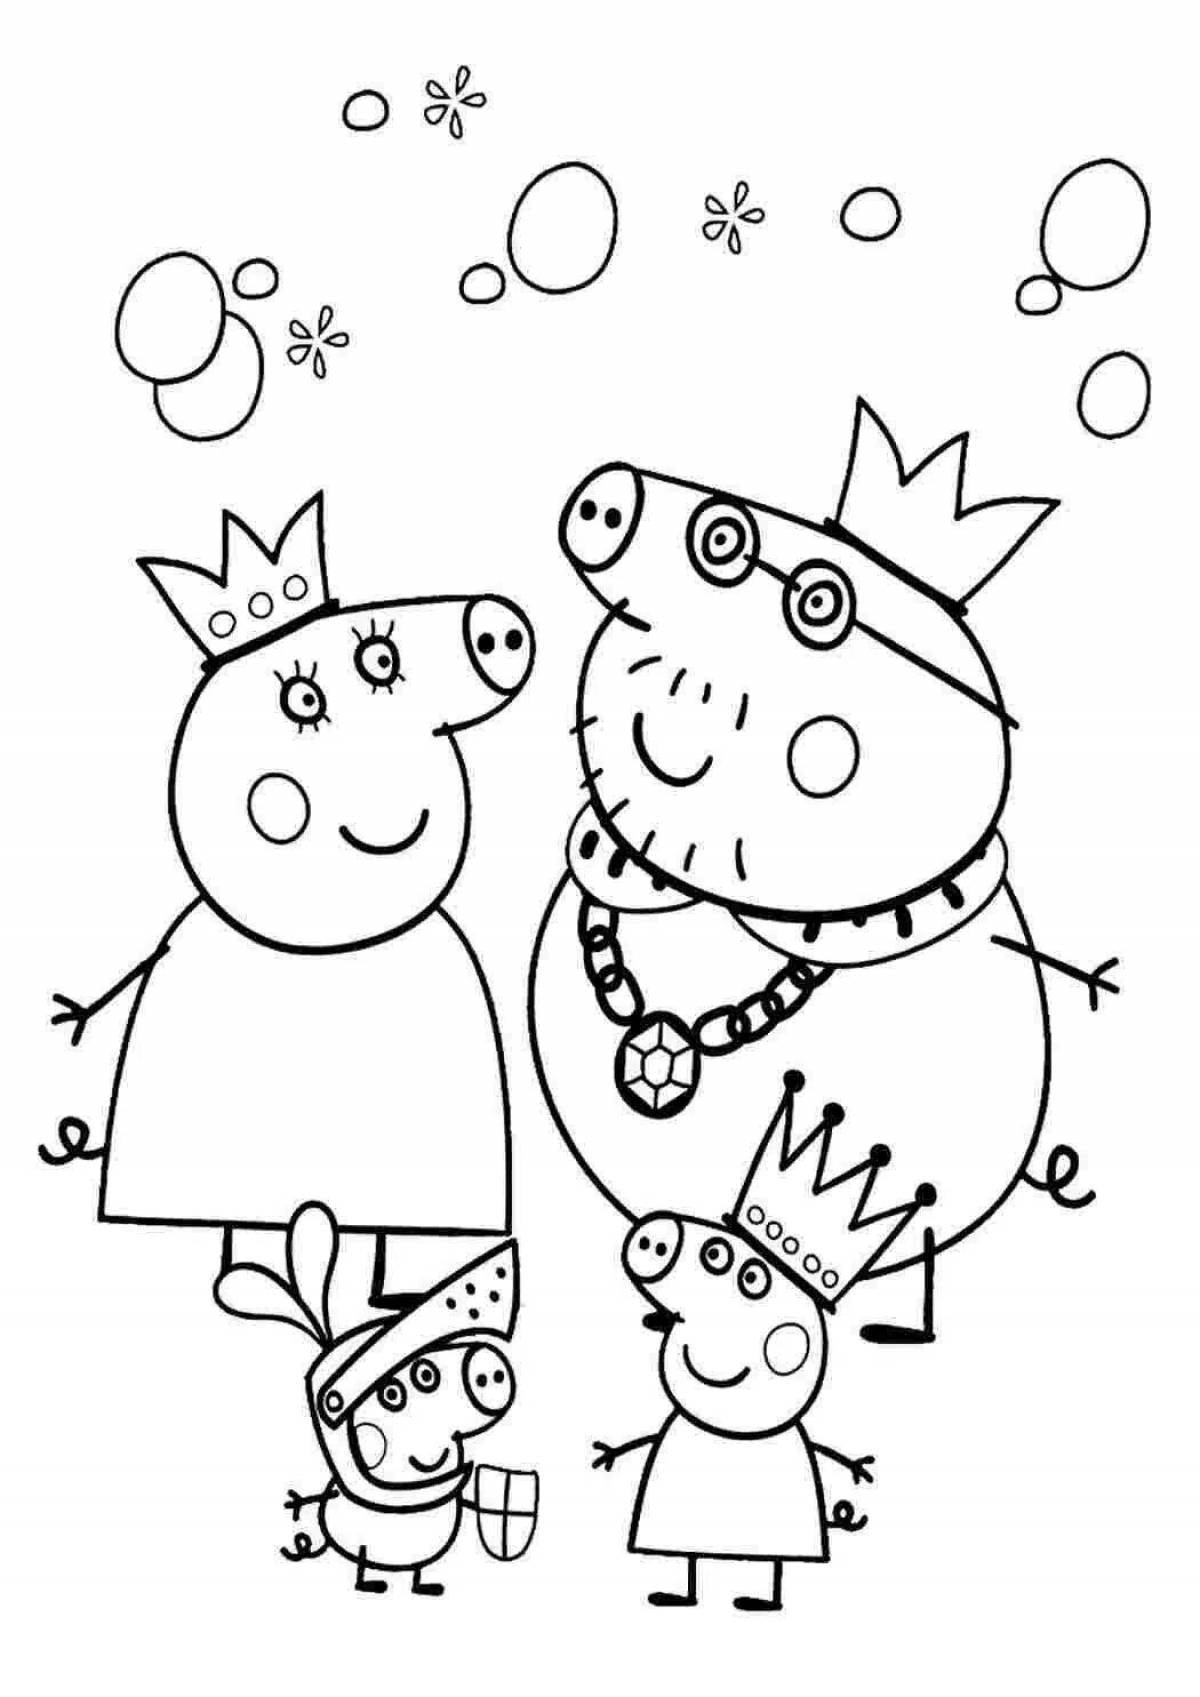 Charming peppa pig coloring book for children 4-5 years old